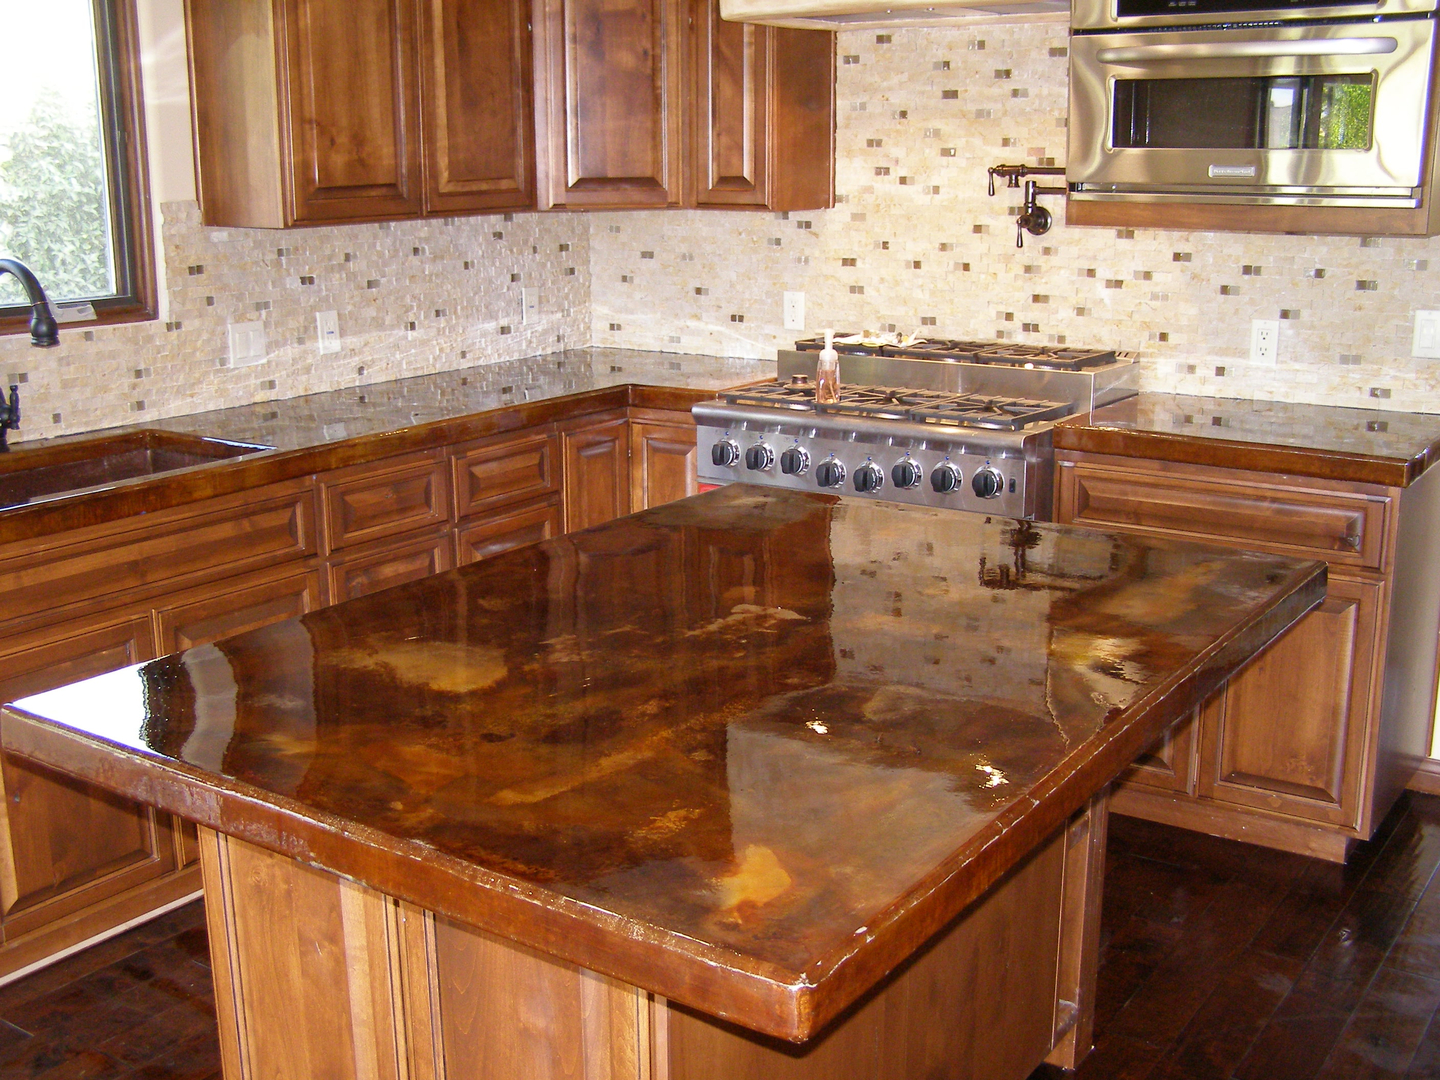 A Full Wood Kitchen Space With Matching Countertops